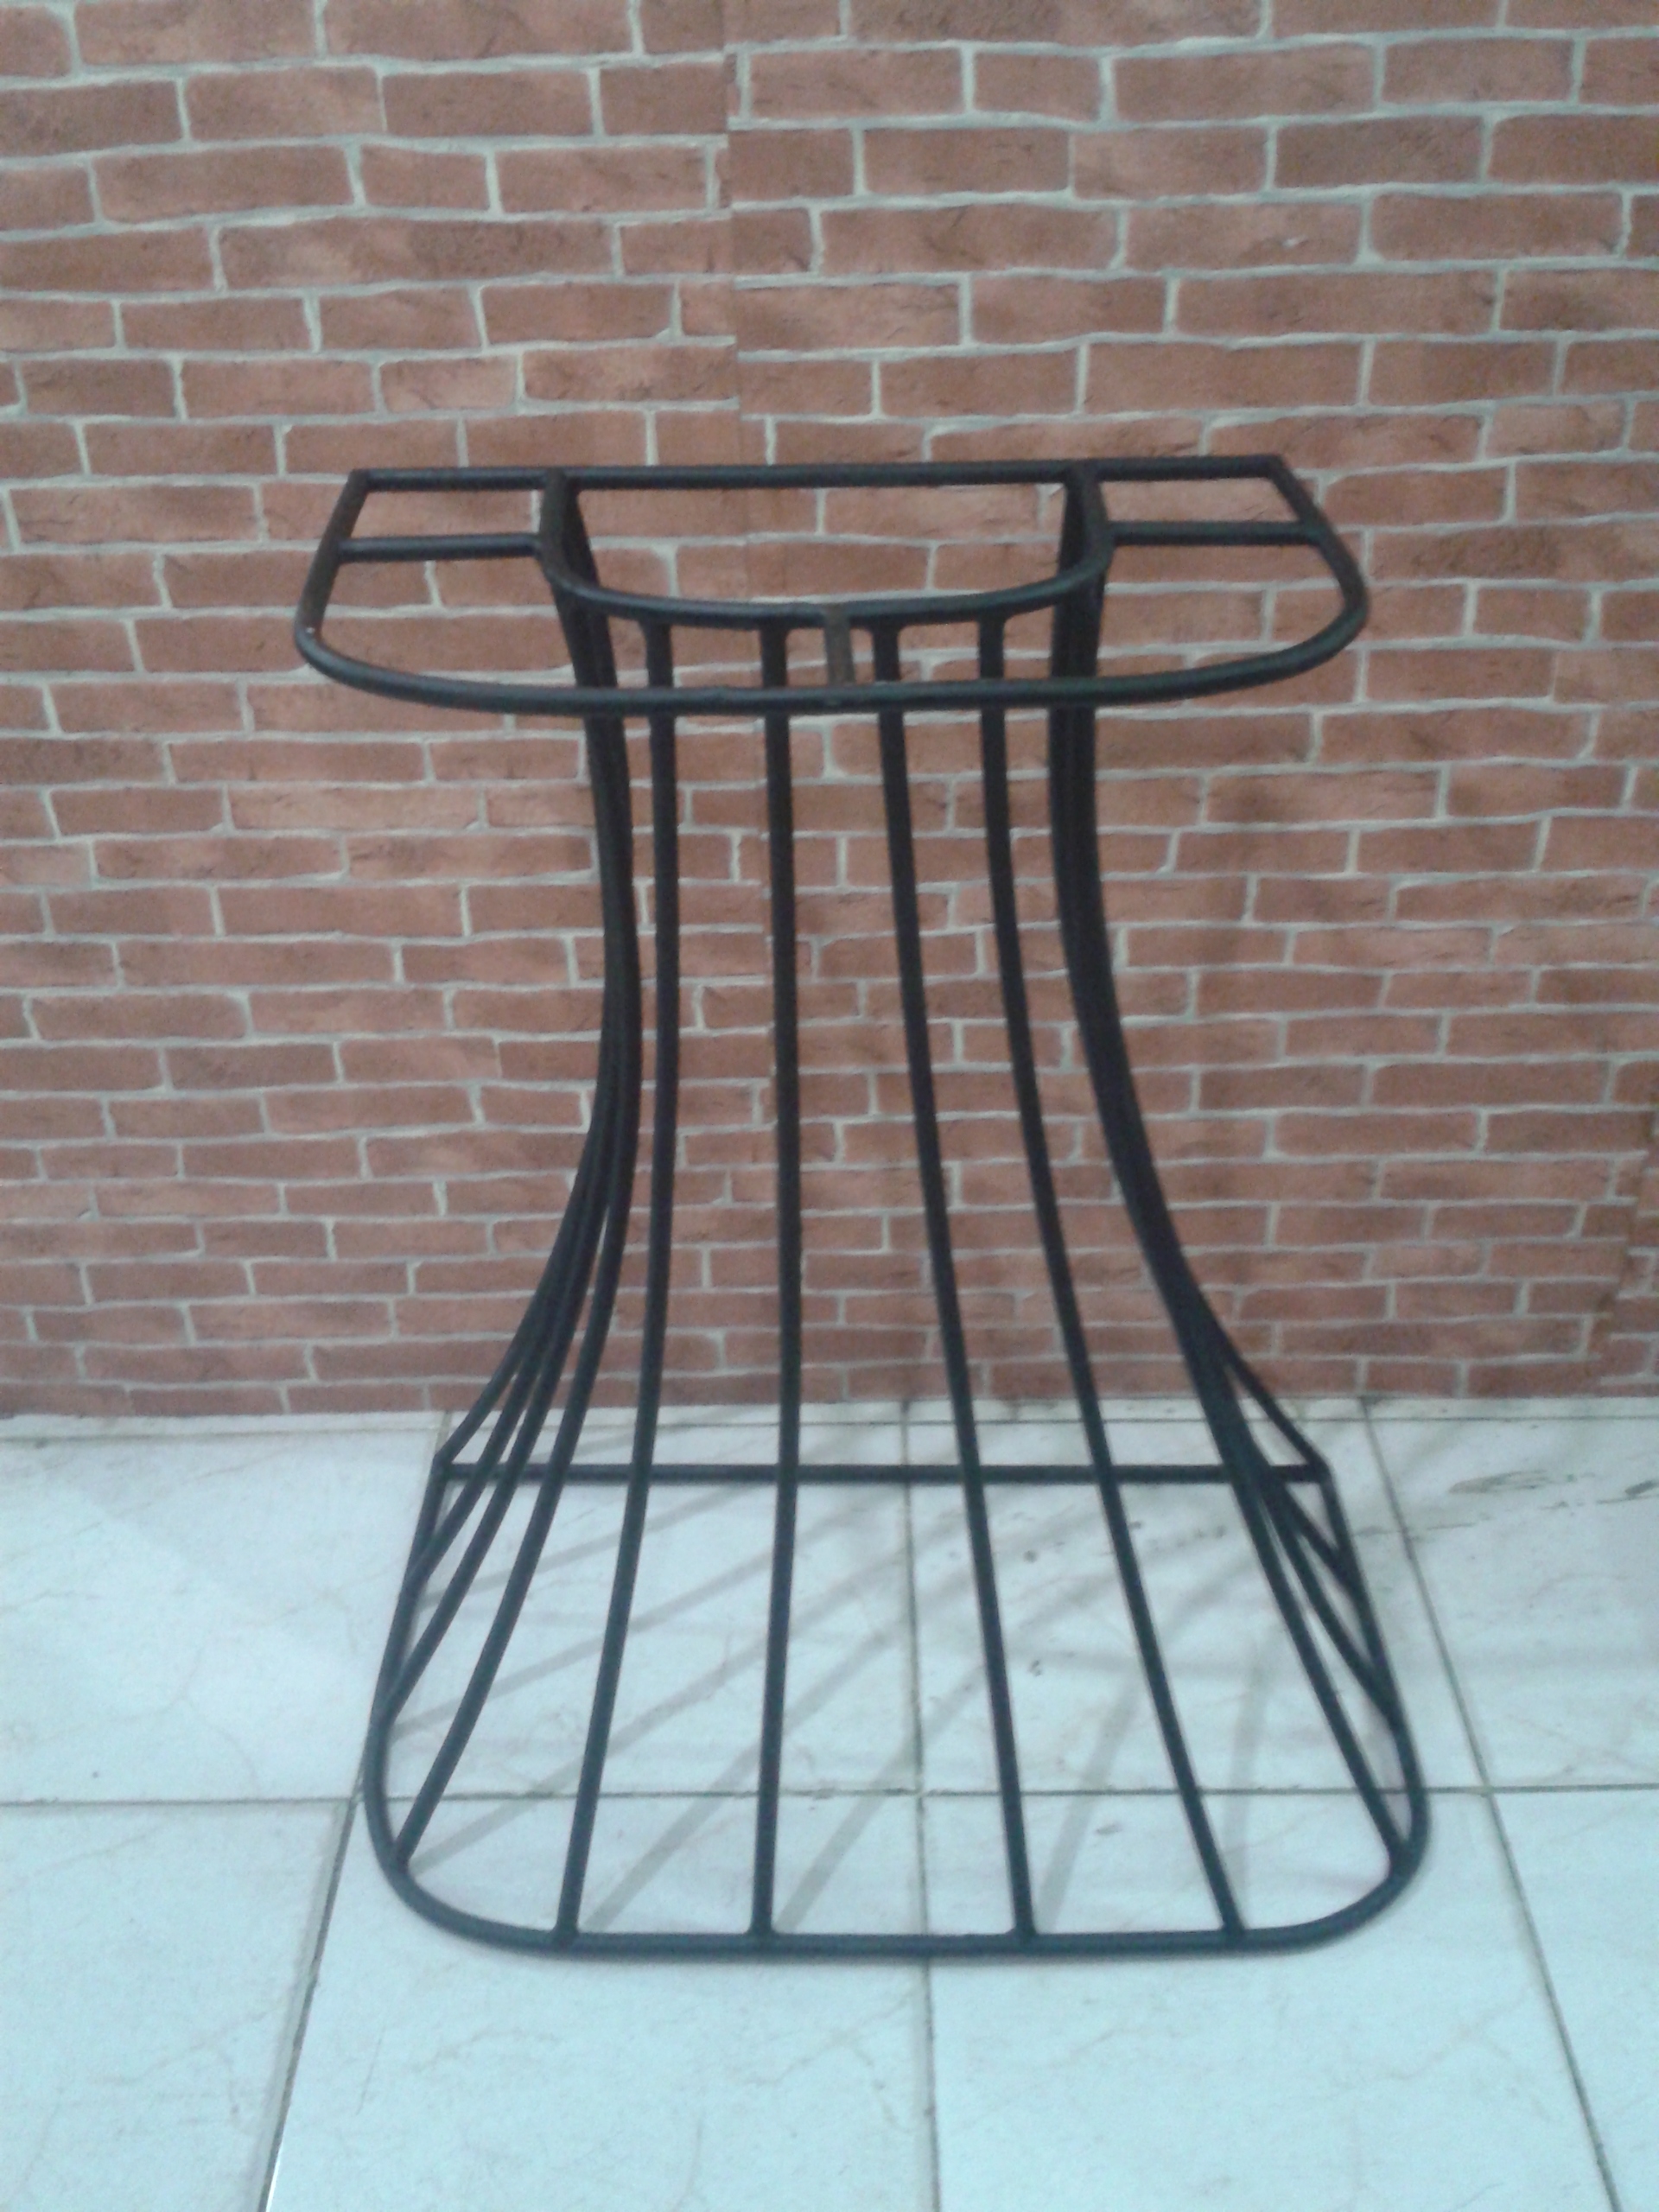 Iron stand IRA001A size high 65 cm.Top wide 29.7 x 45.3 cm.